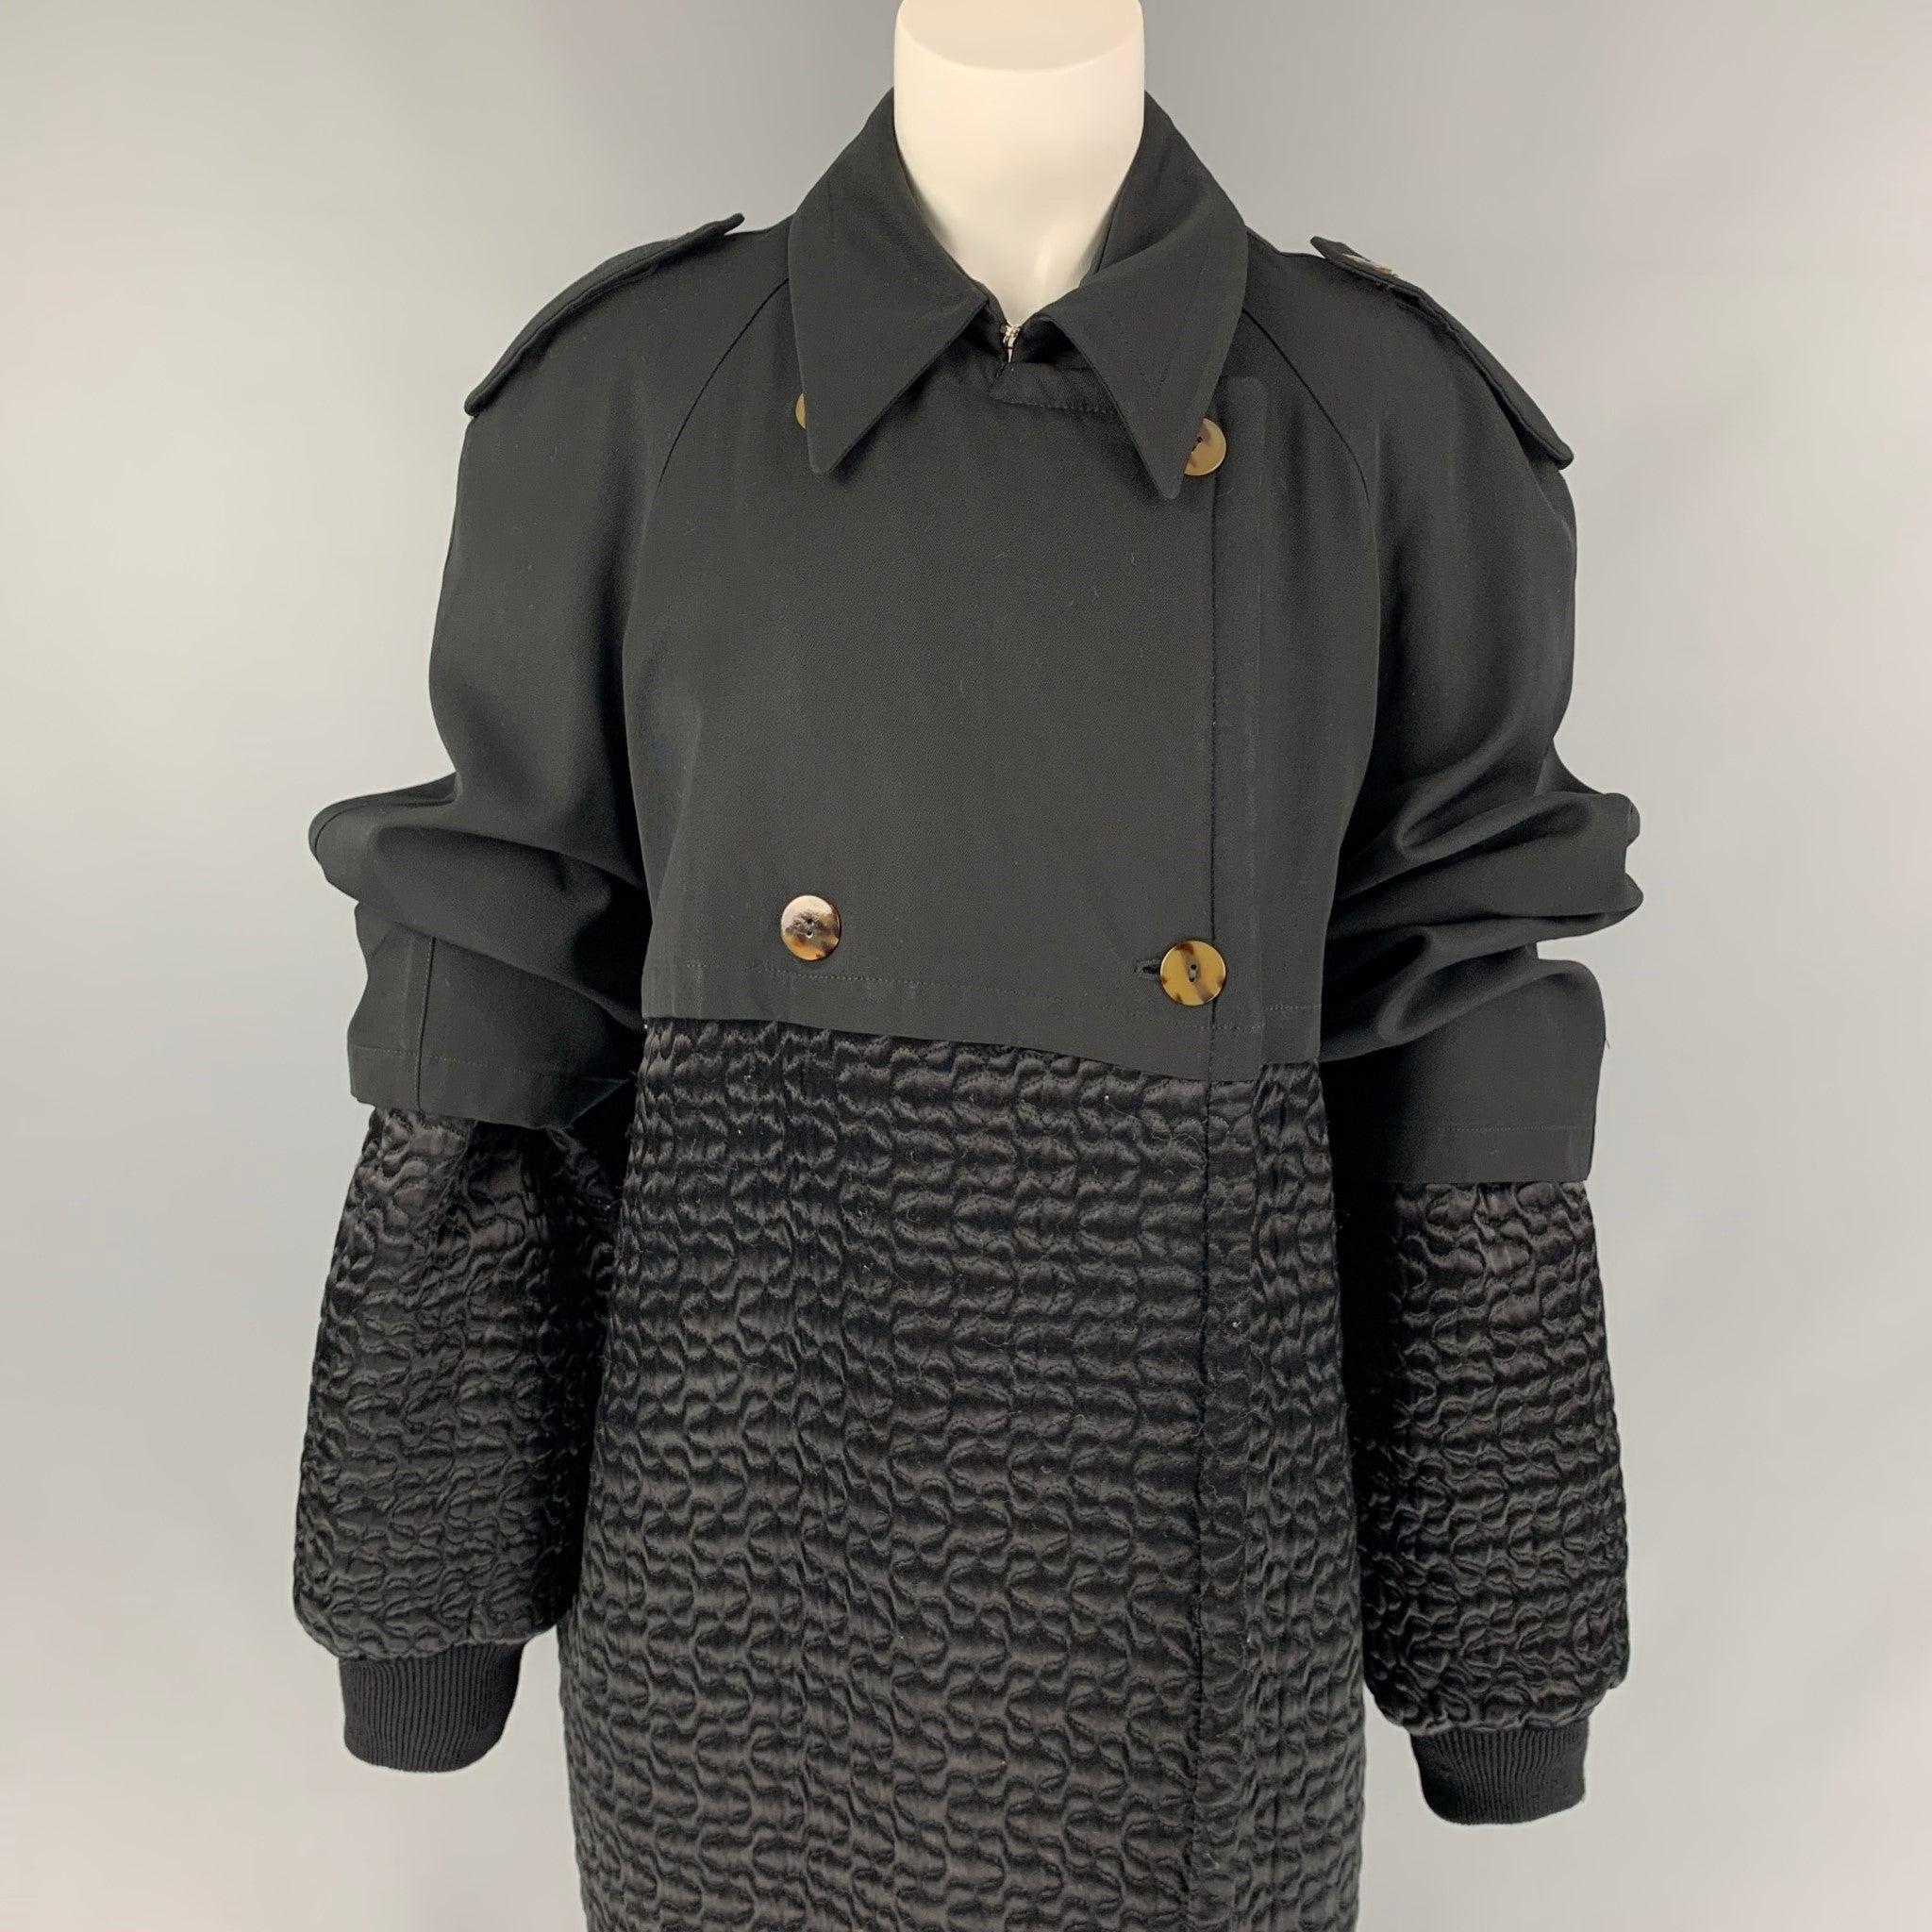 VINTAGE 1980's JEAN PAUL GAULTIER pour GIBO trench coat comes in a black quilted material with a full liner featuring a layered style, epaulettes, pointed collar, ribbed hem, slit pockets, and a double breasted closure. Early Gaultier Collectors